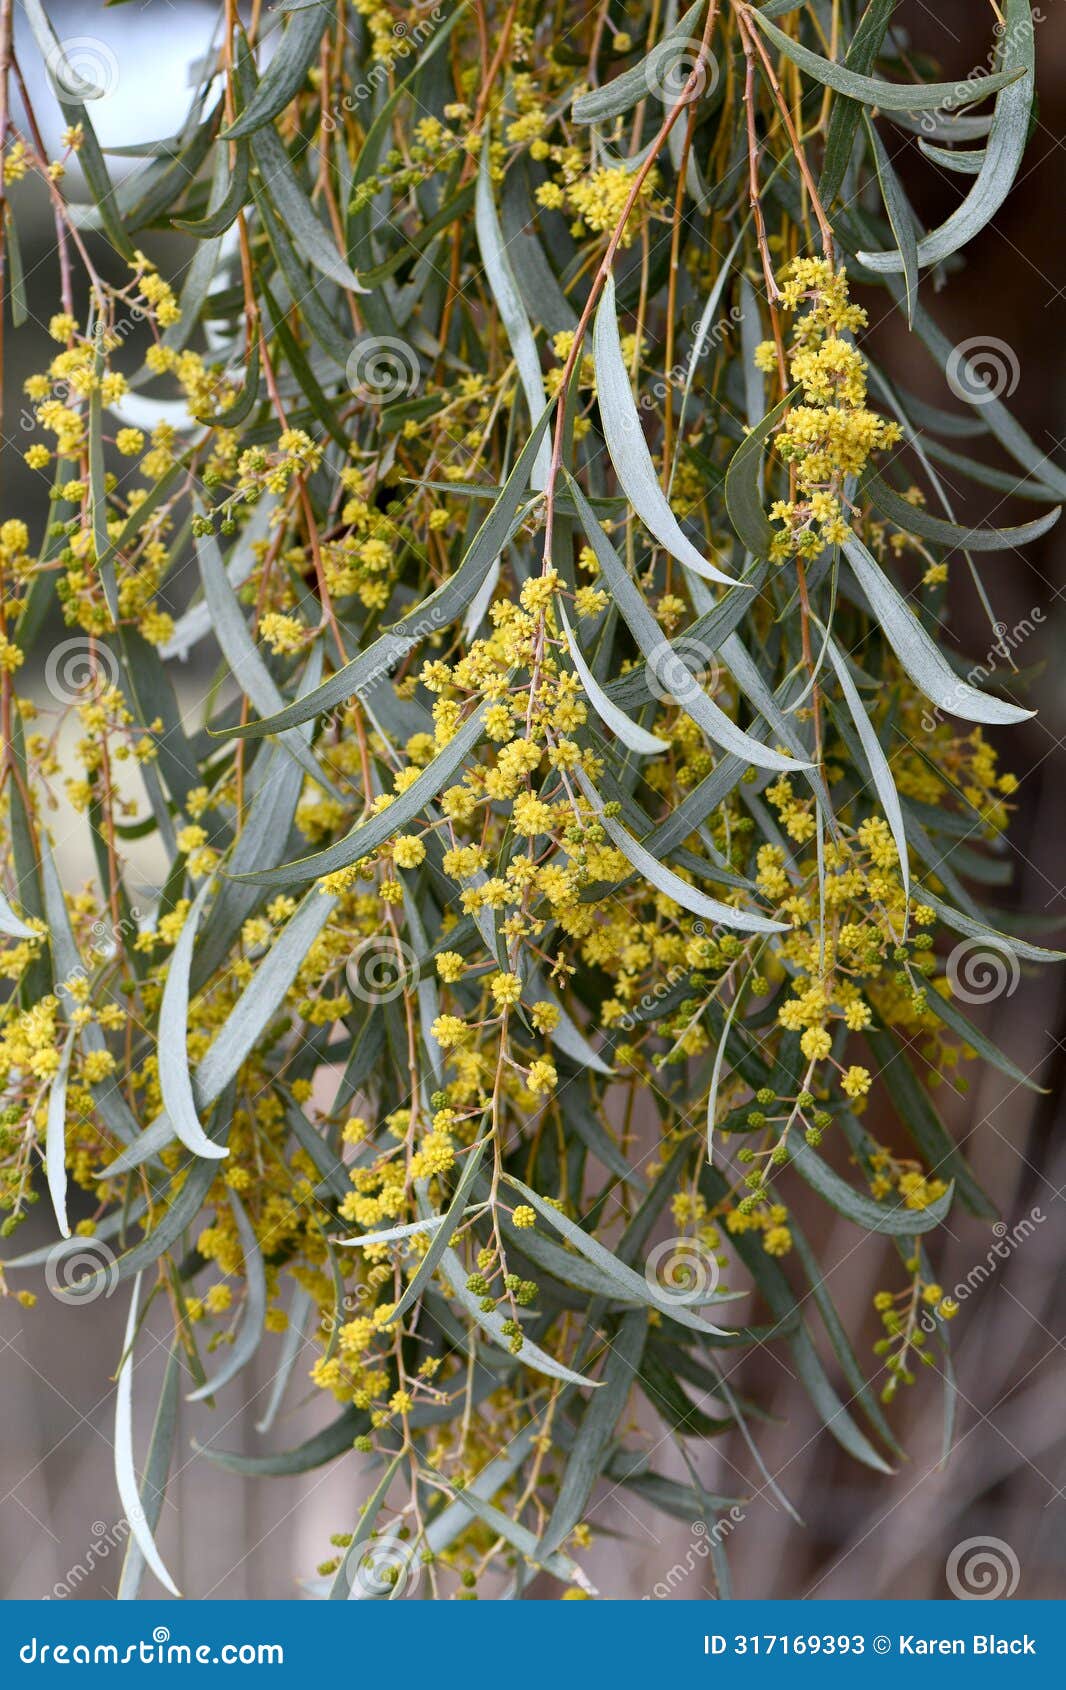 yellow flowers and blue grey foliage of the australian native weeping myall, acacia pendula, family fabaceae